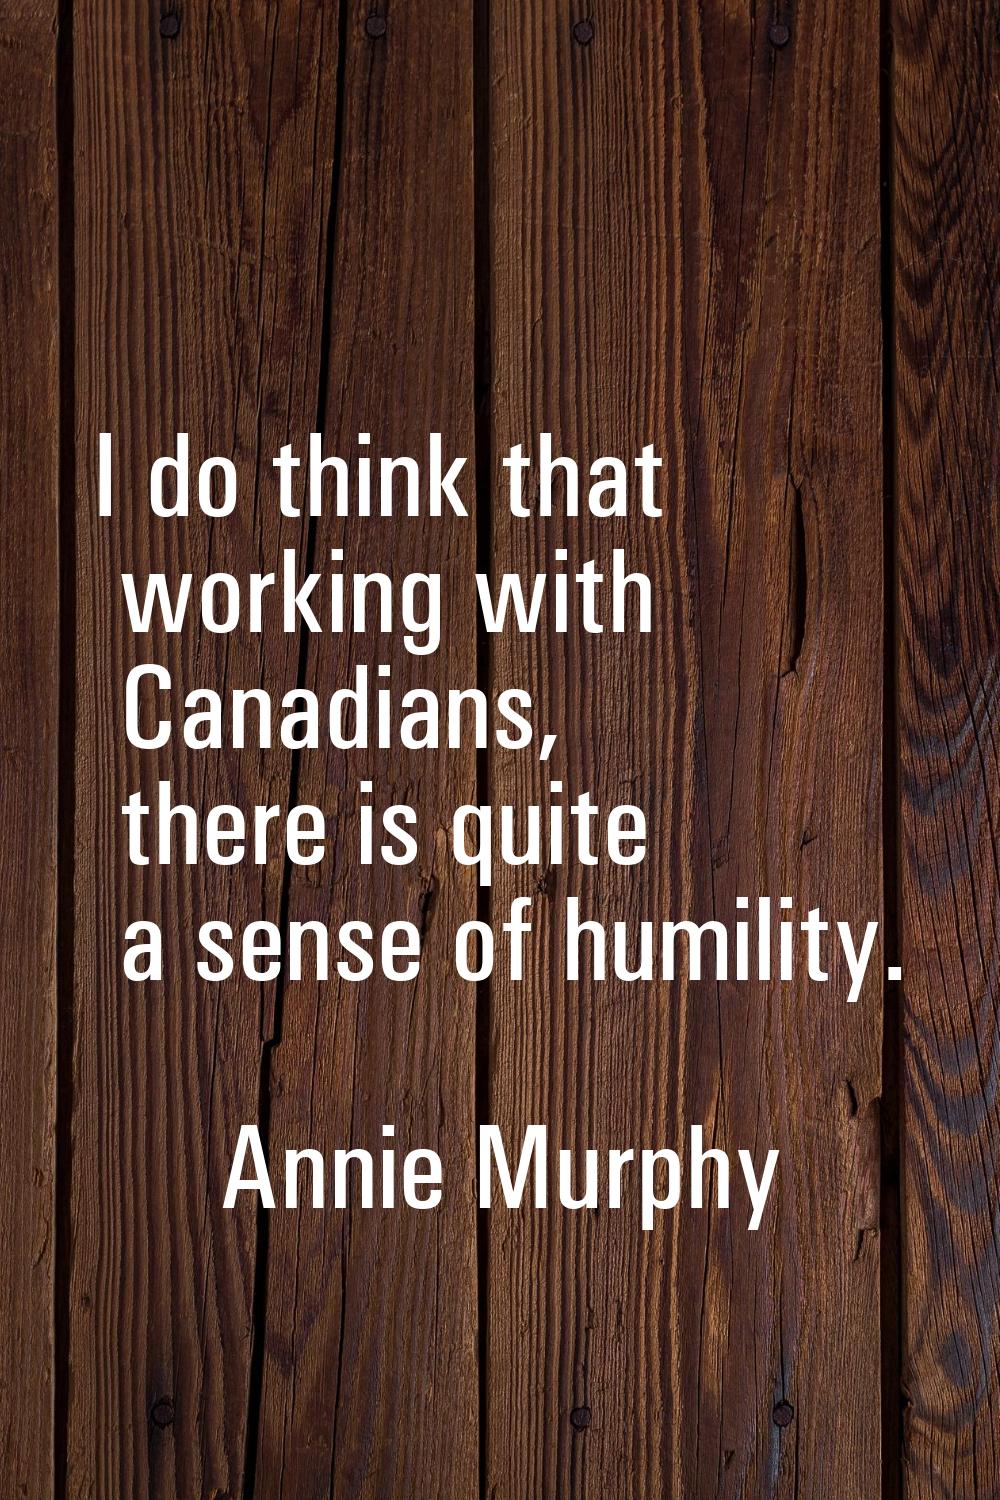 I do think that working with Canadians, there is quite a sense of humility.